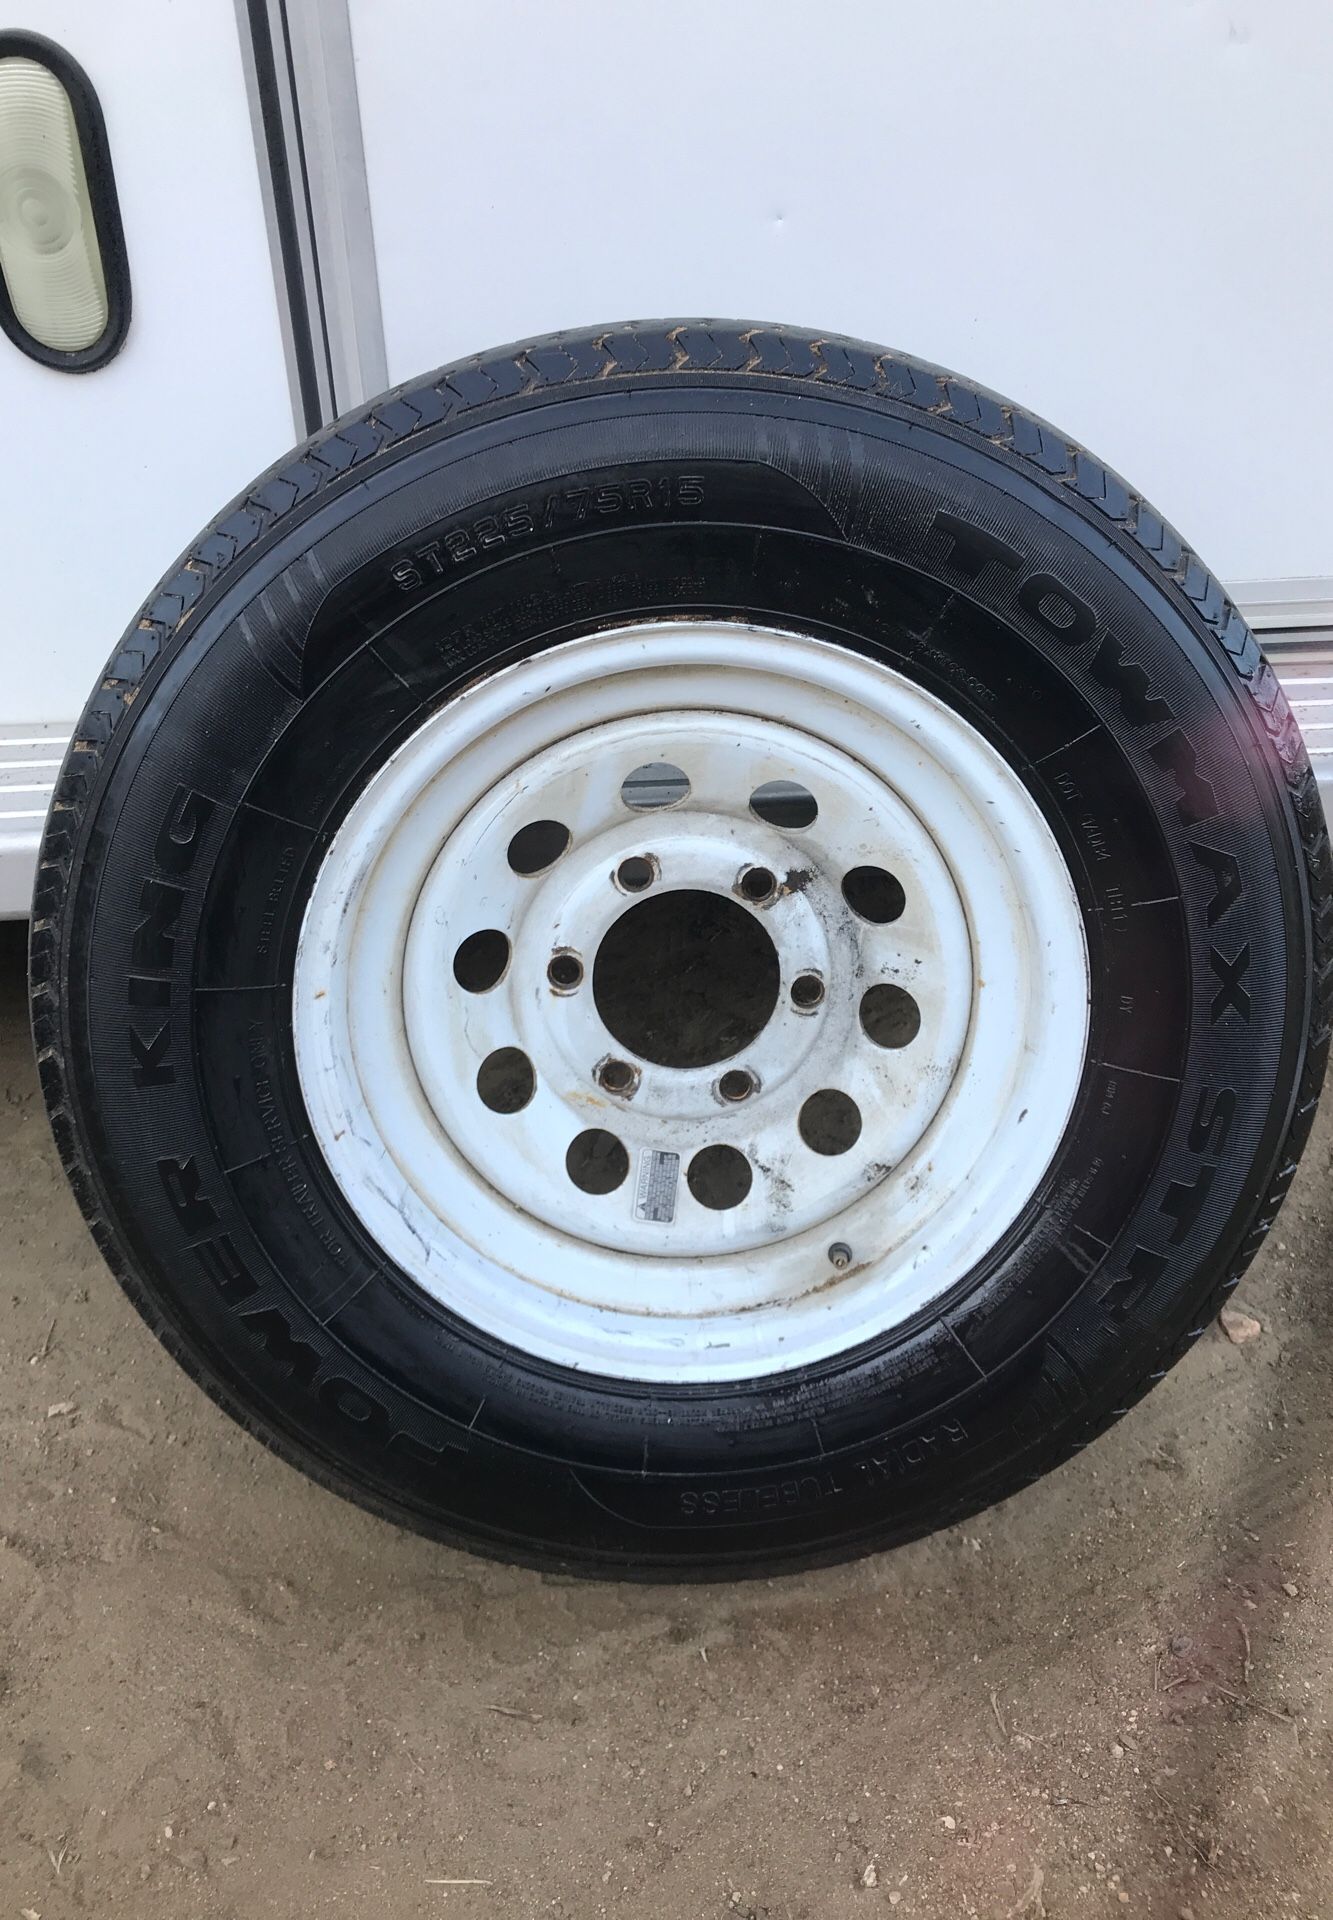 Trailer tire 10ply and rim 225/75-15